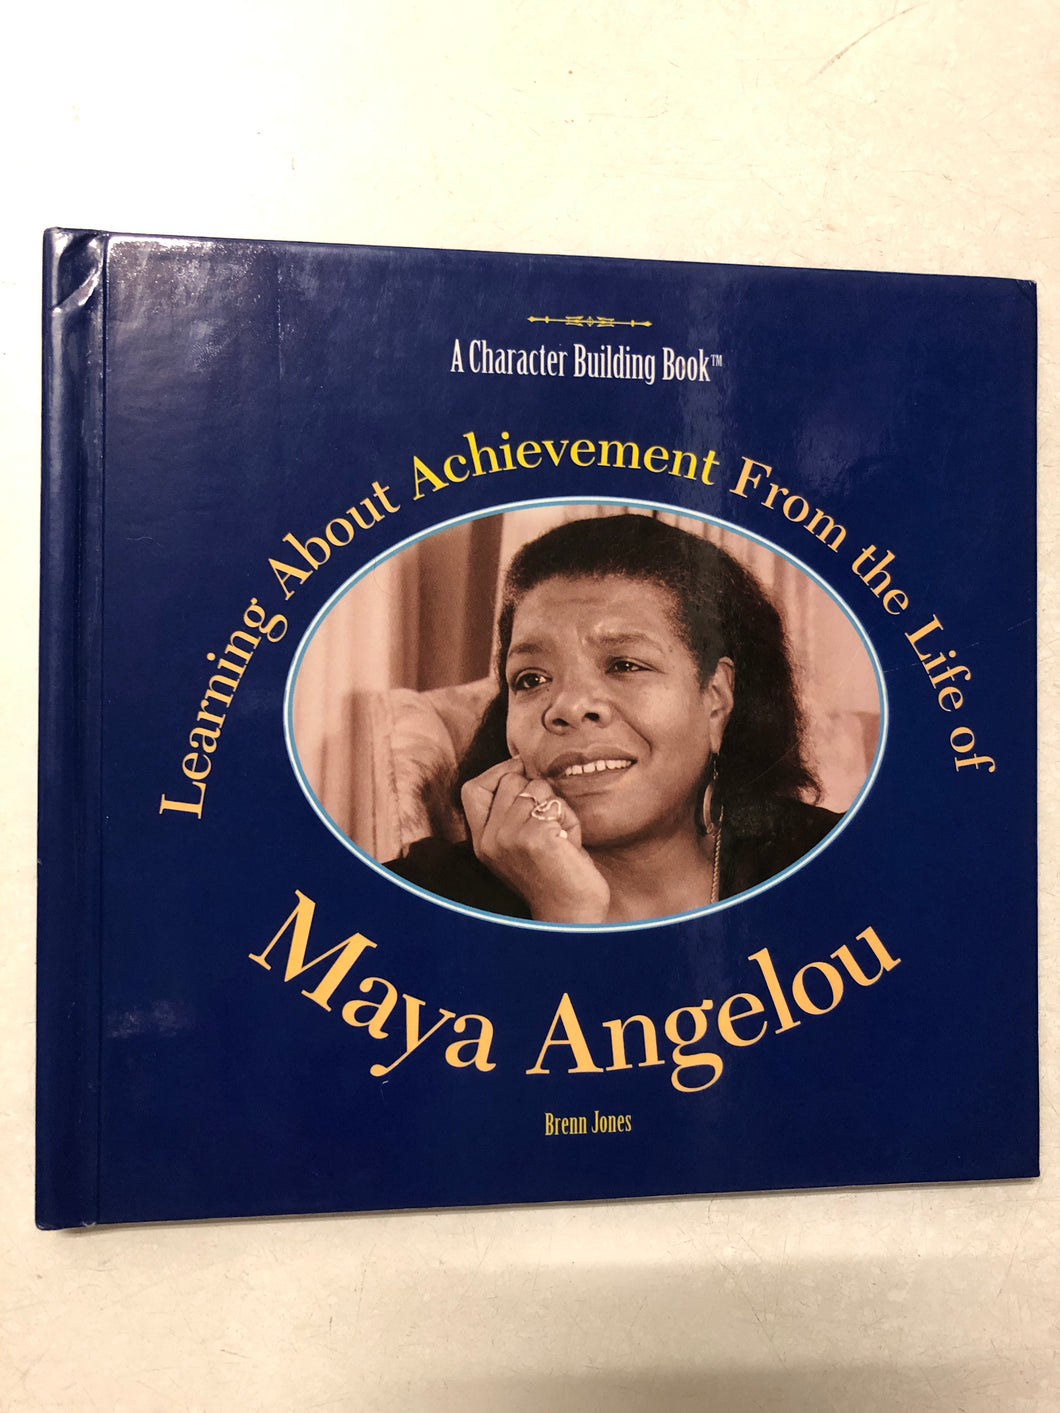 Learning About Achievement From the Life of Maya Angelou - Slick Cat Books 